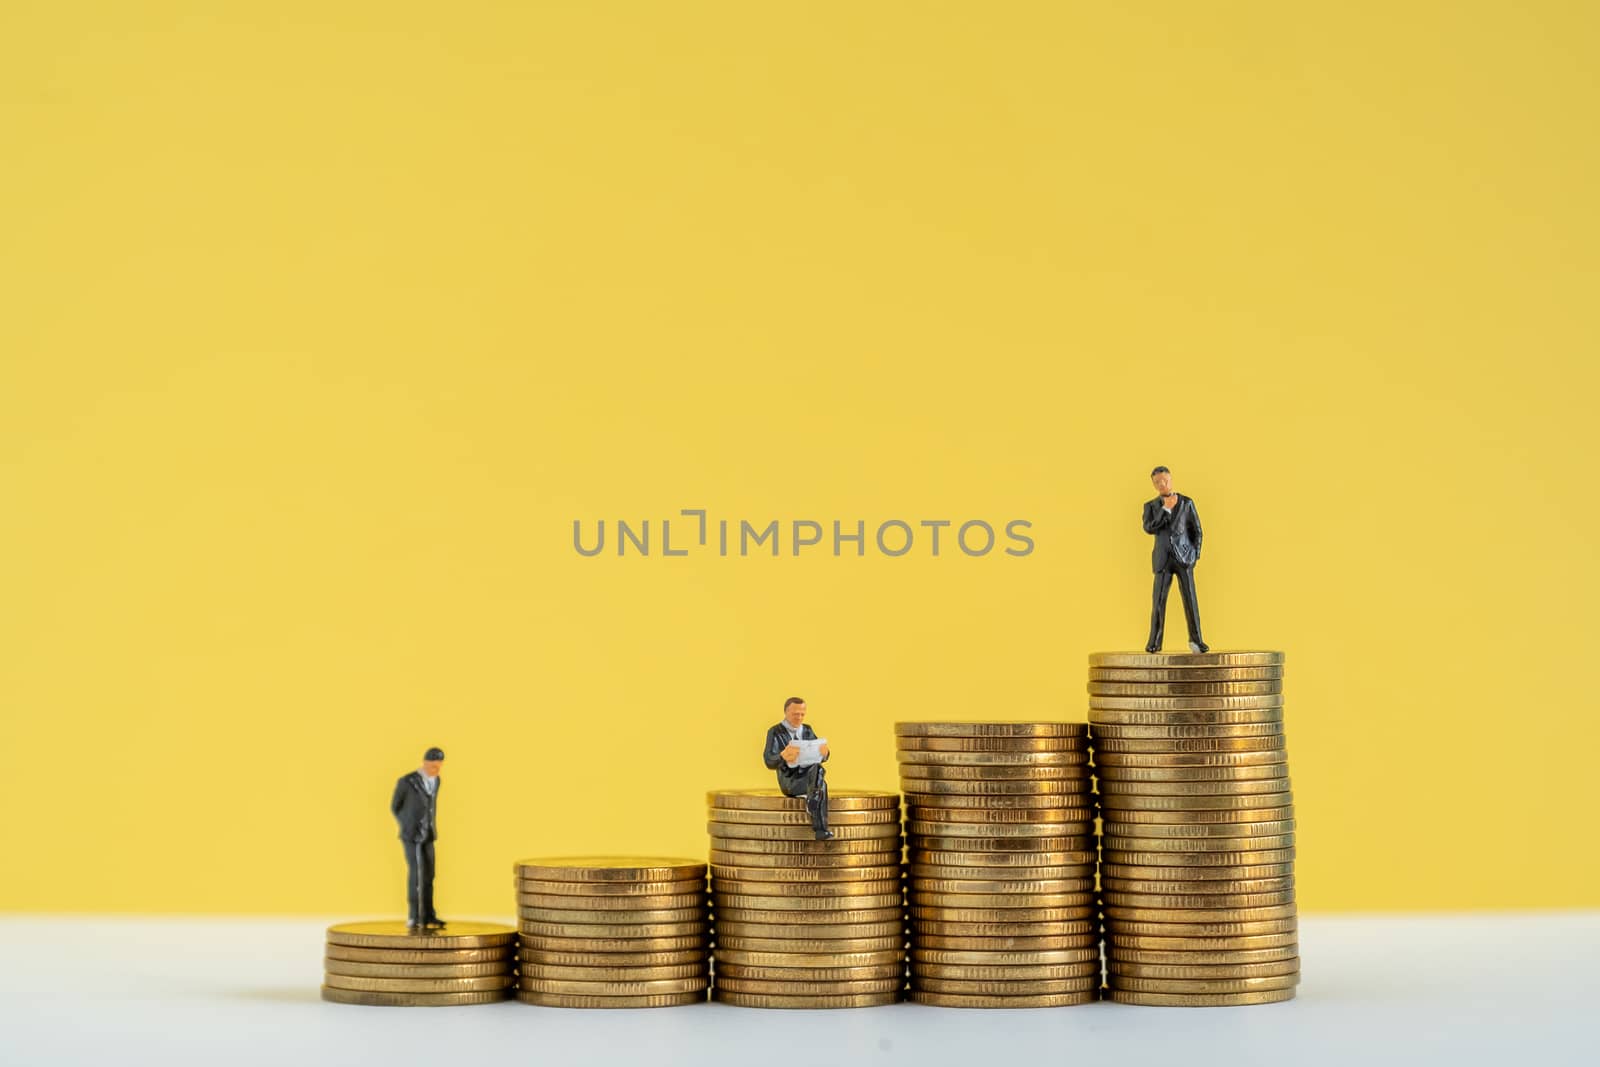 miniture of business model thinking about Investment strategy. by Toefotostock